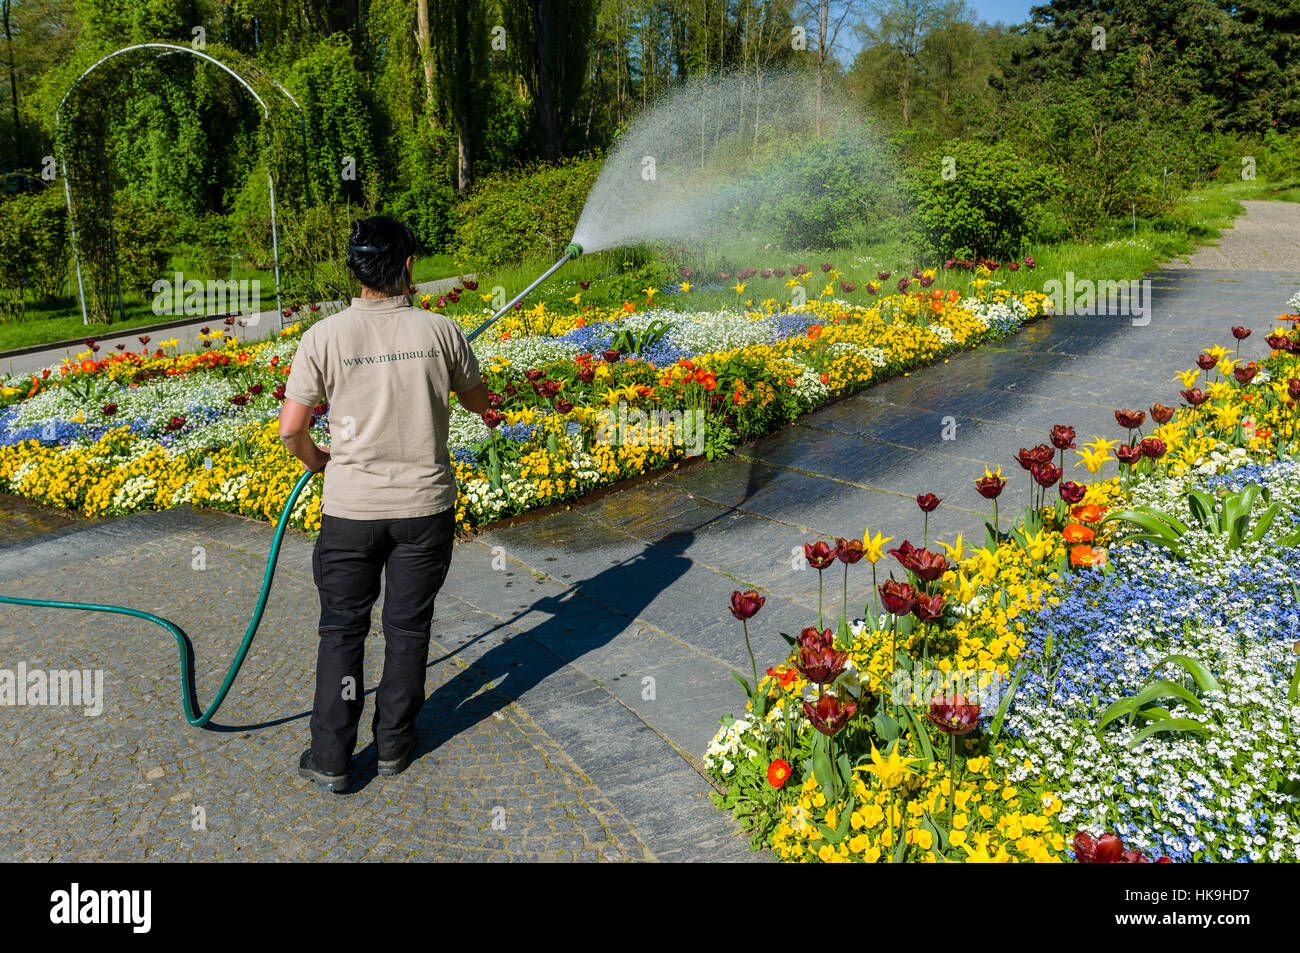 Gardener watering the flowers at Island Mainau, the 'Island of flowers' at Lake Constance Stock Photo